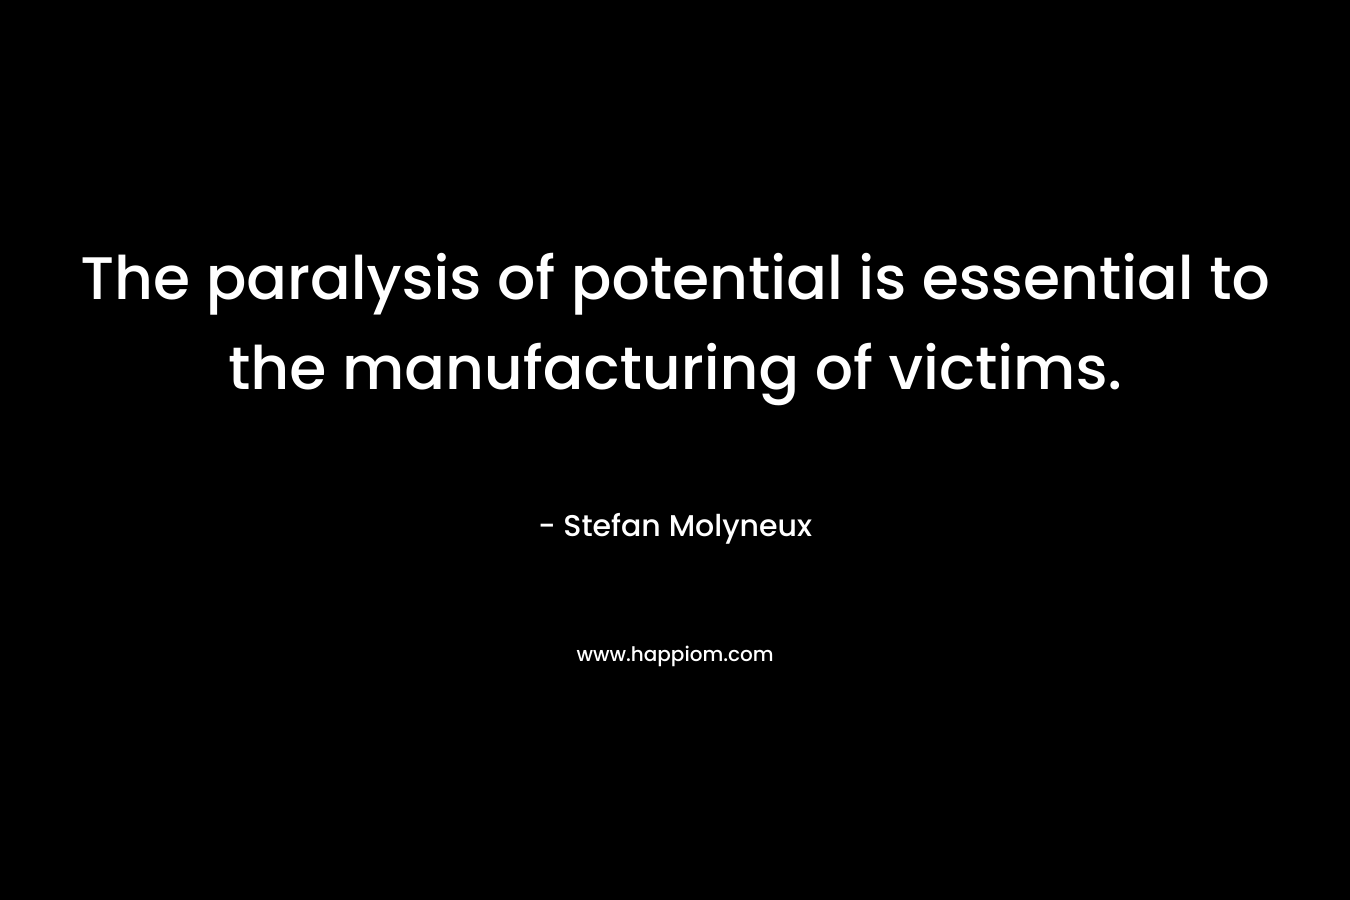 The paralysis of potential is essential to the manufacturing of victims.